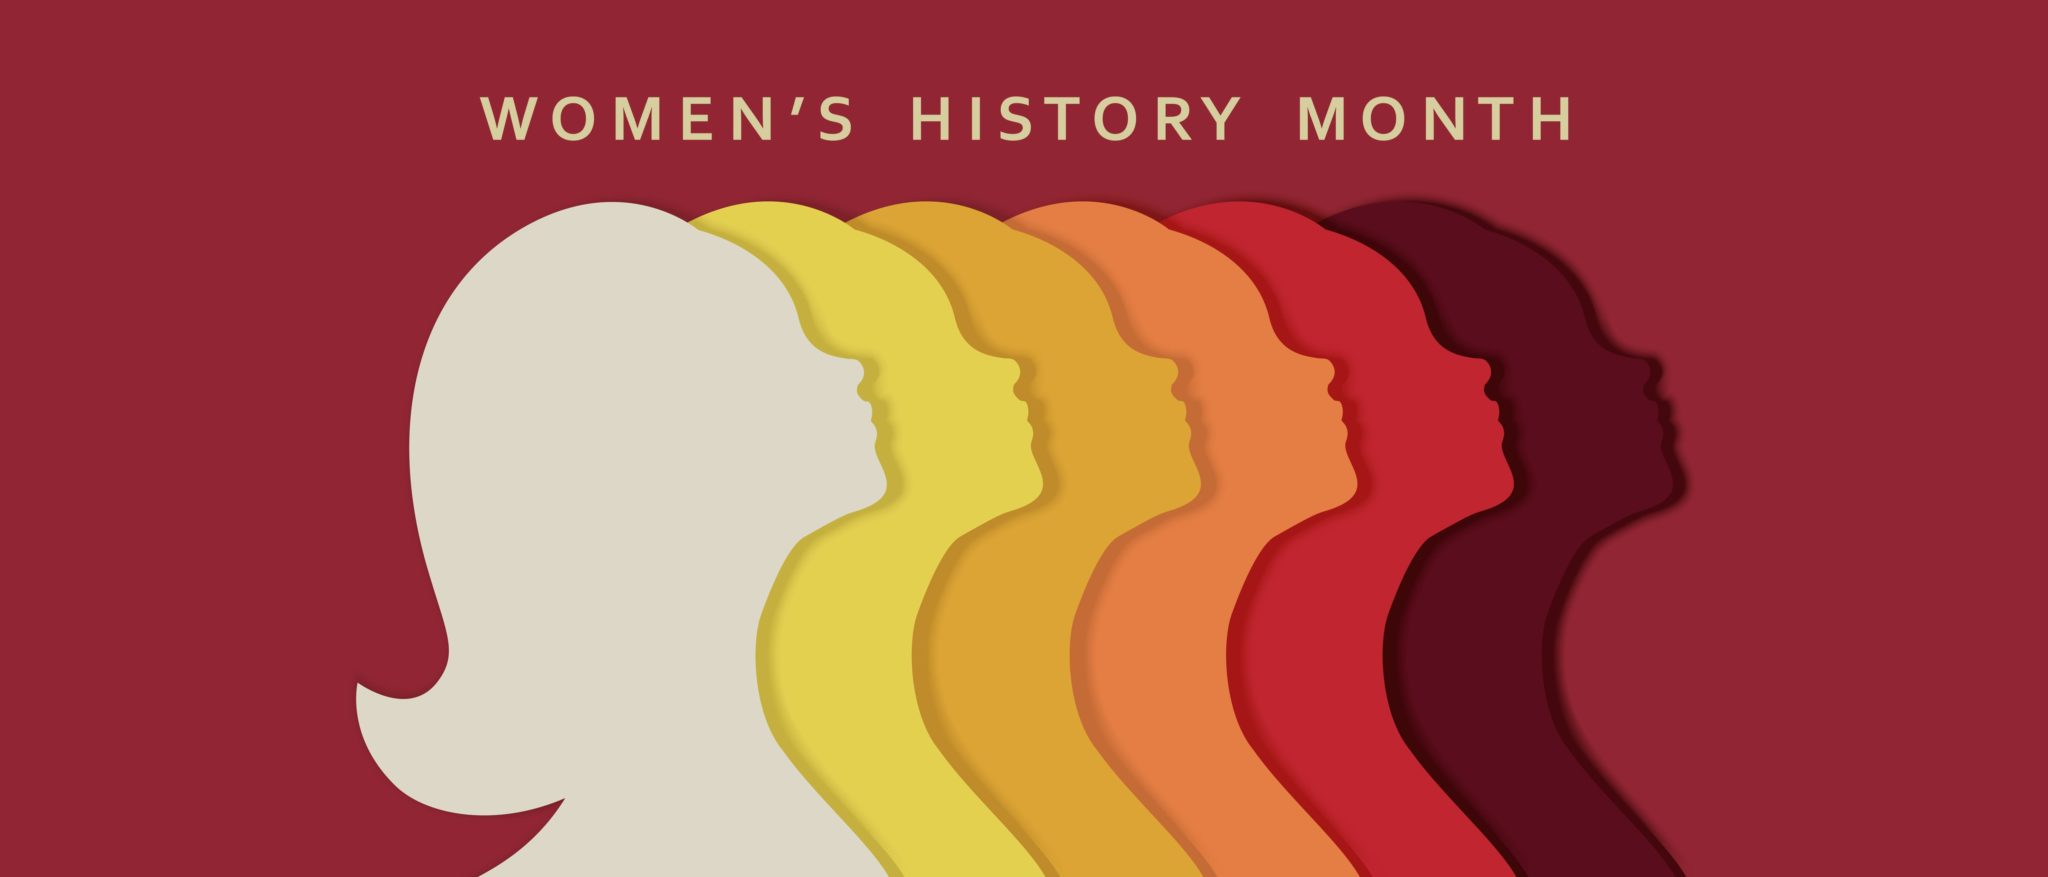 How Did Women’s History Month Come To Be?